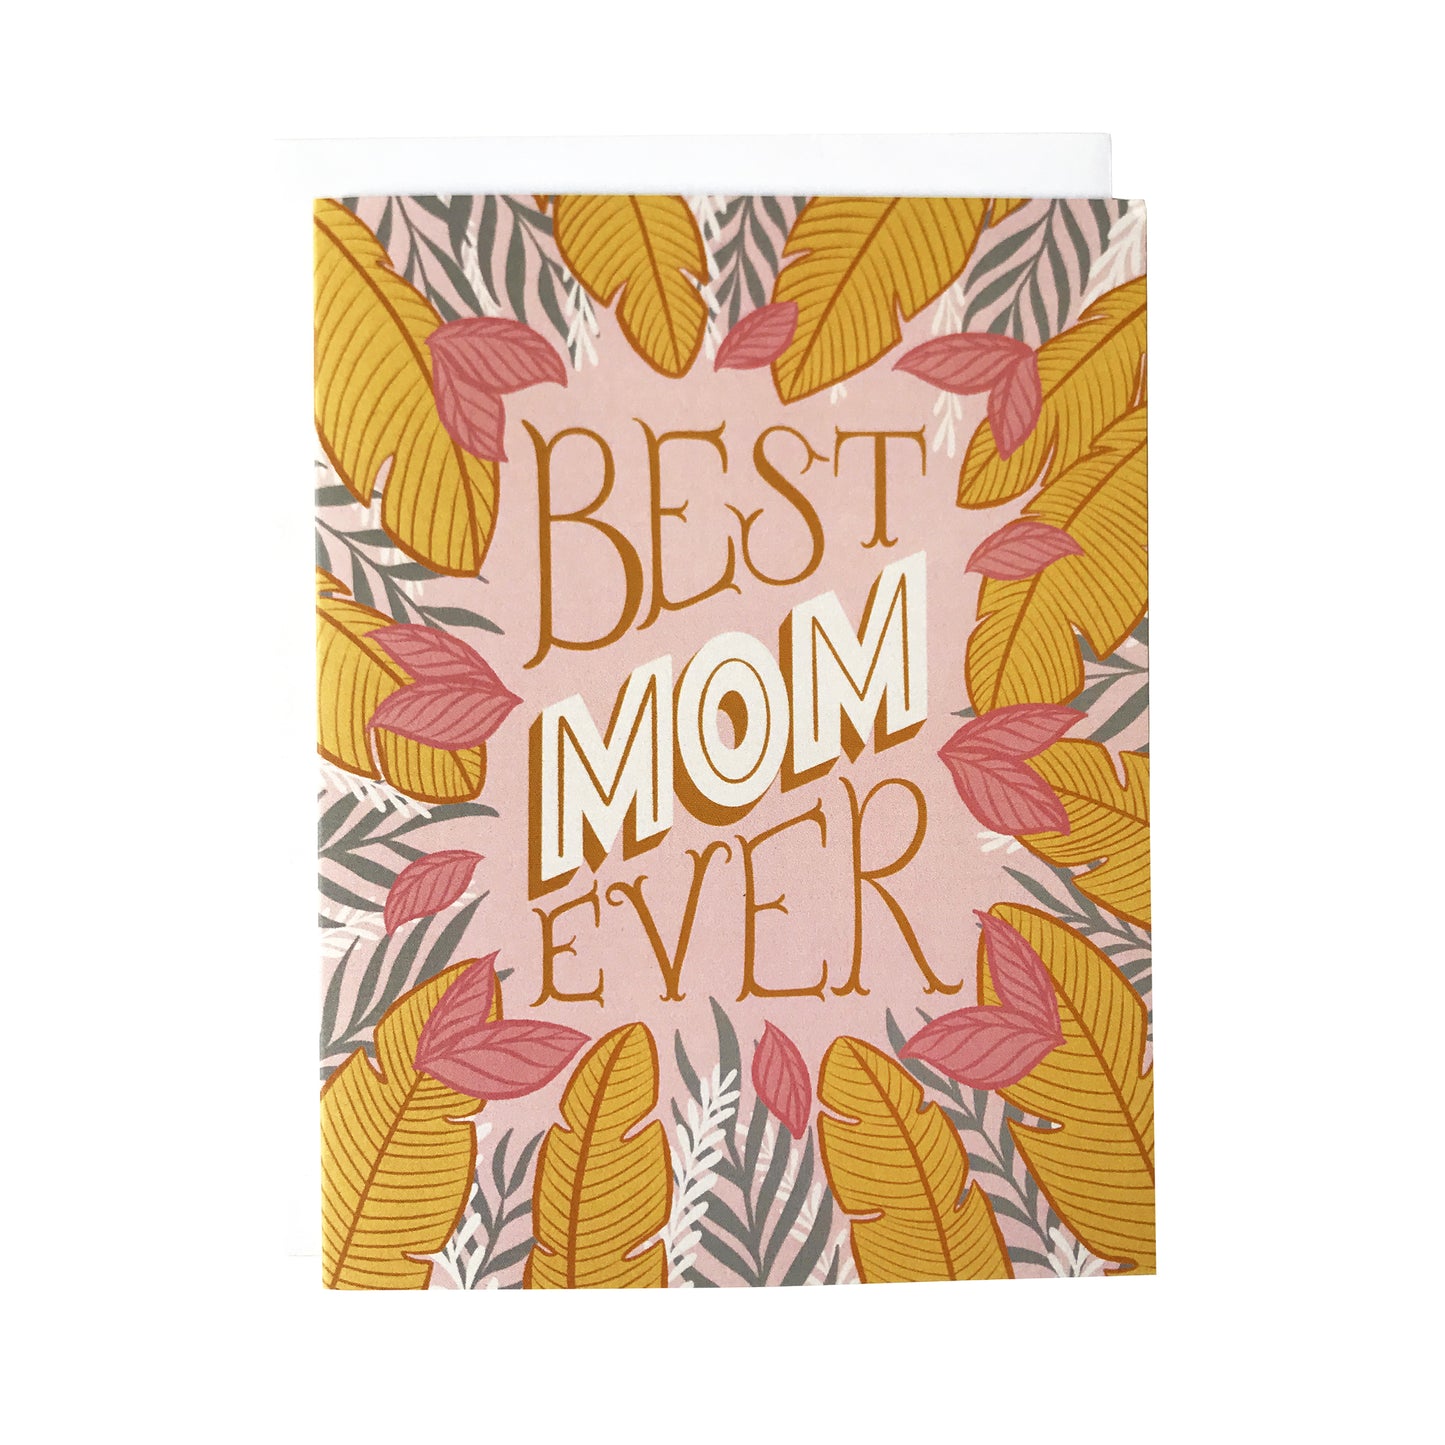 A pink greeting card is covered in golden yellow, white and grey tropical leaves along with the lettered phrase "Best Mom Ever" in block letters. The card sits against a white envelope on a white background.